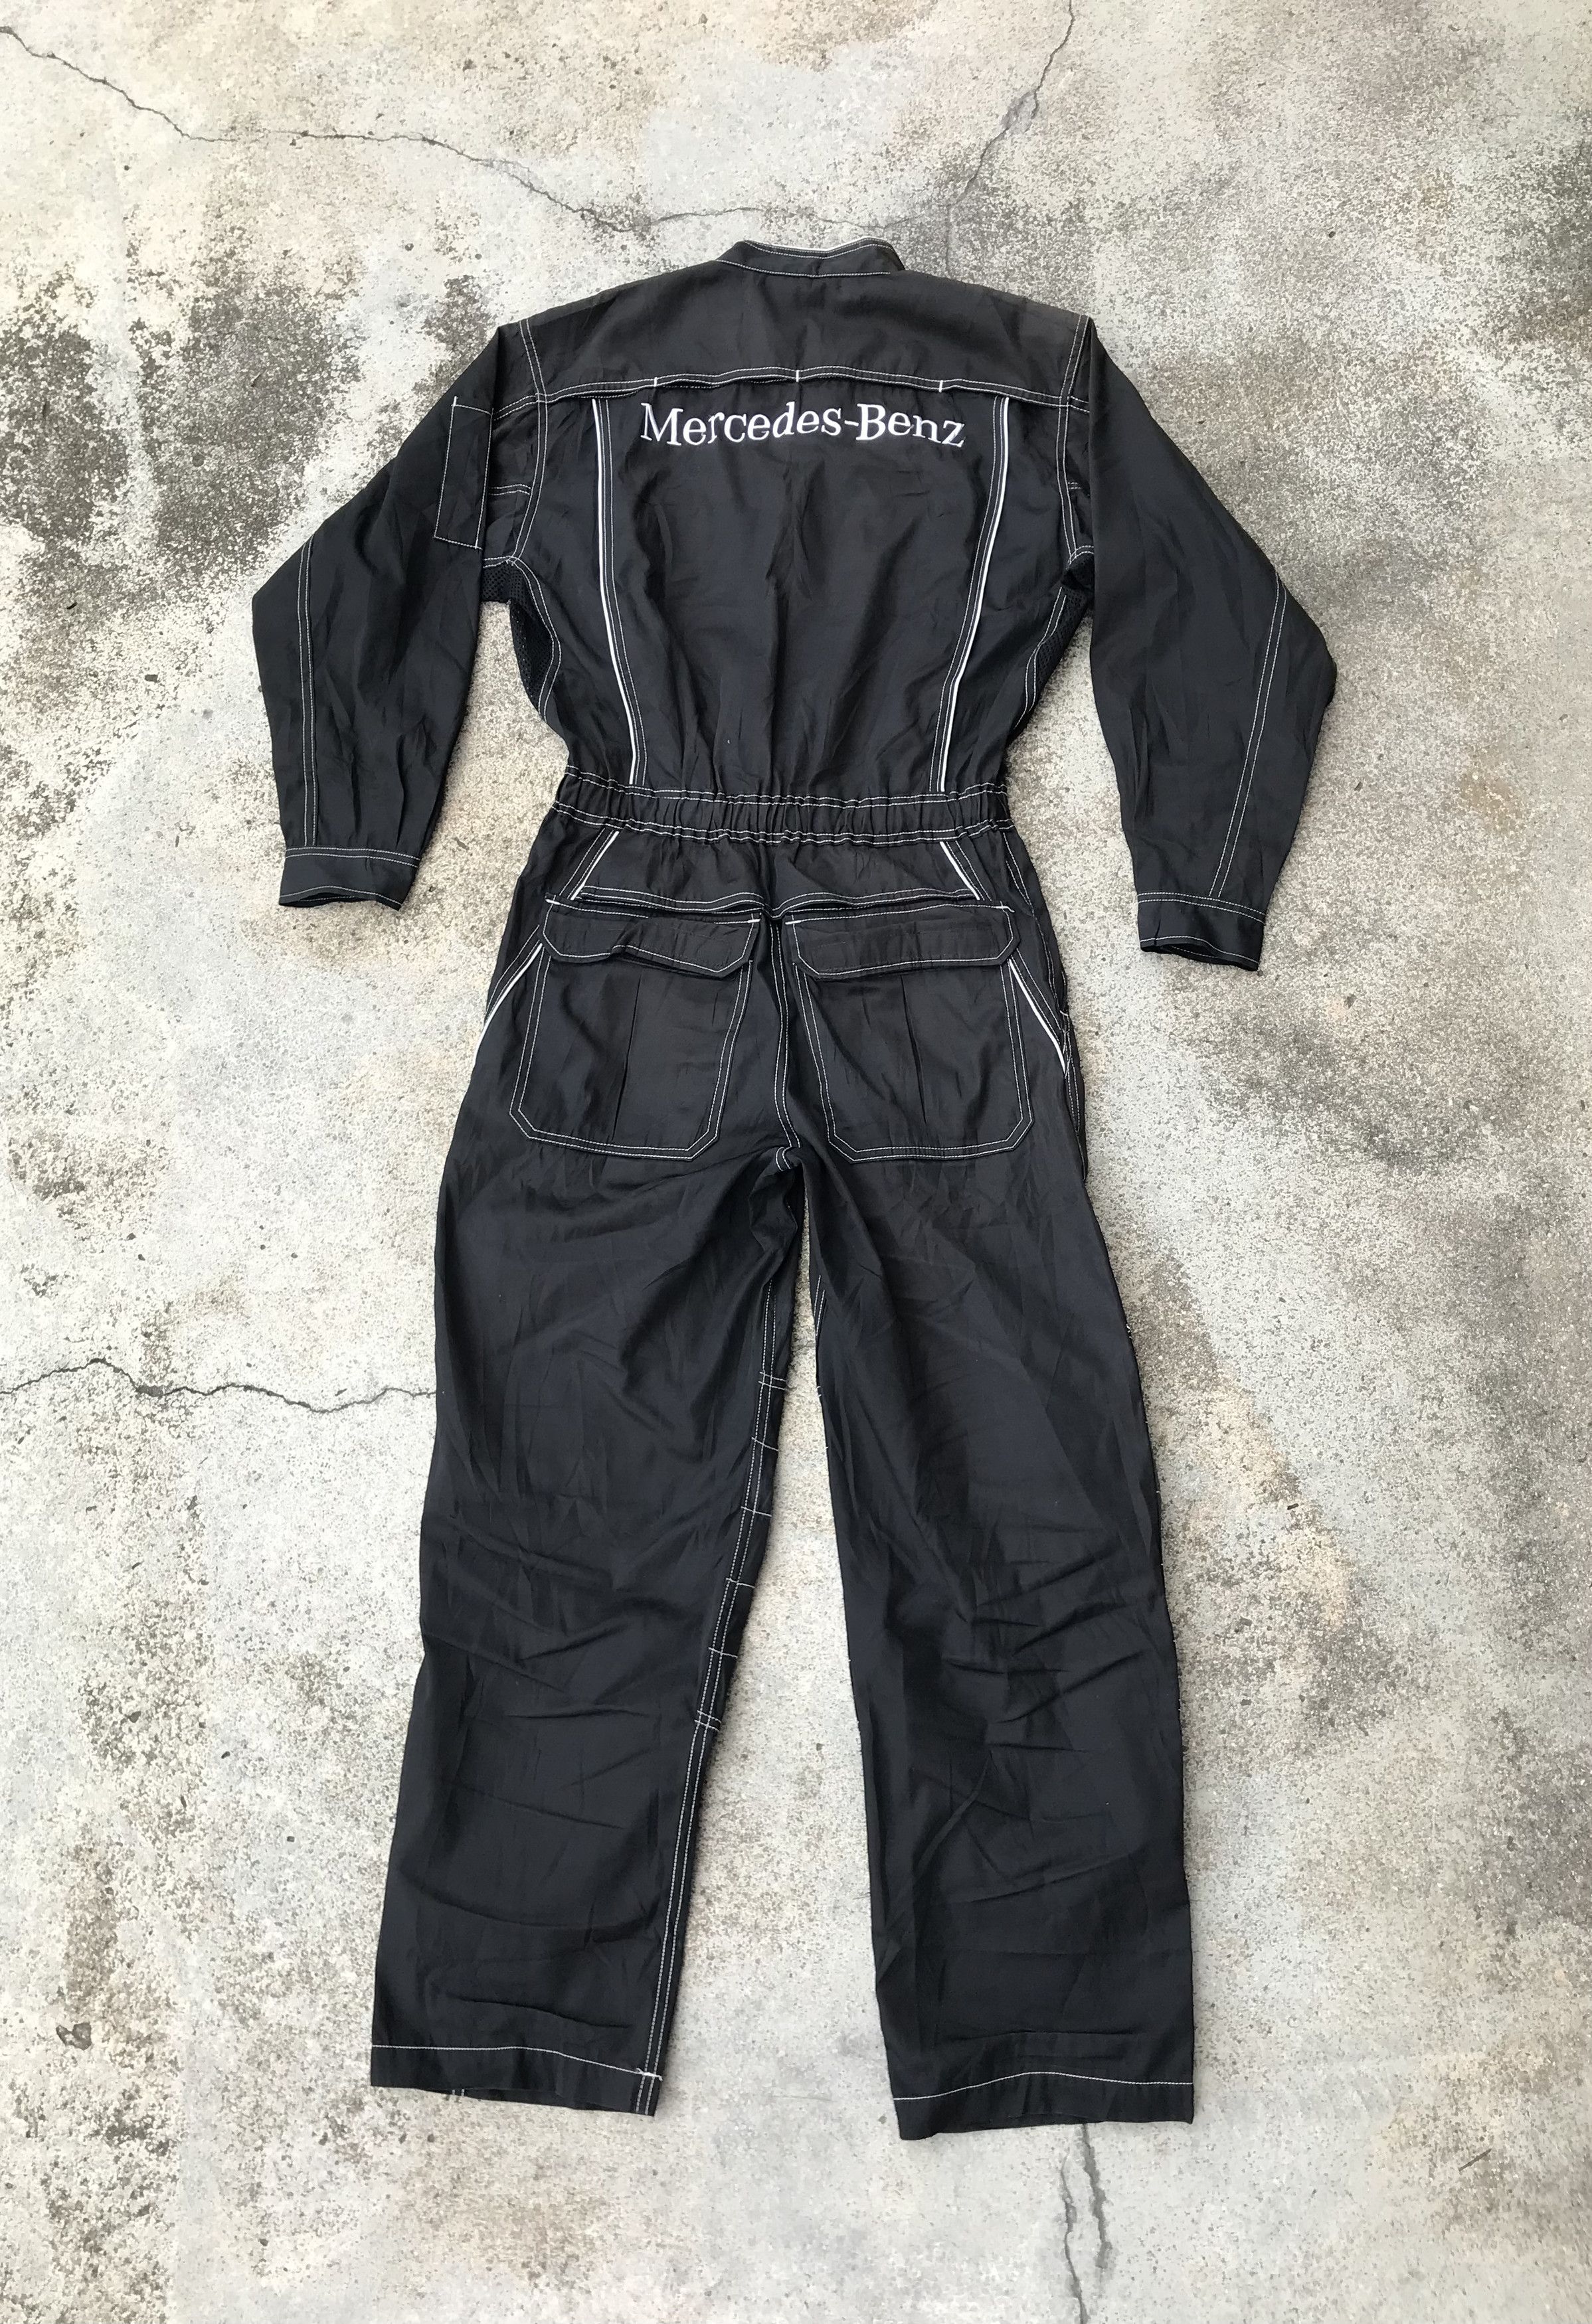 Vintage Mercedes Benz Distressed Overalls Coveralls Size US 31 - 2 Preview